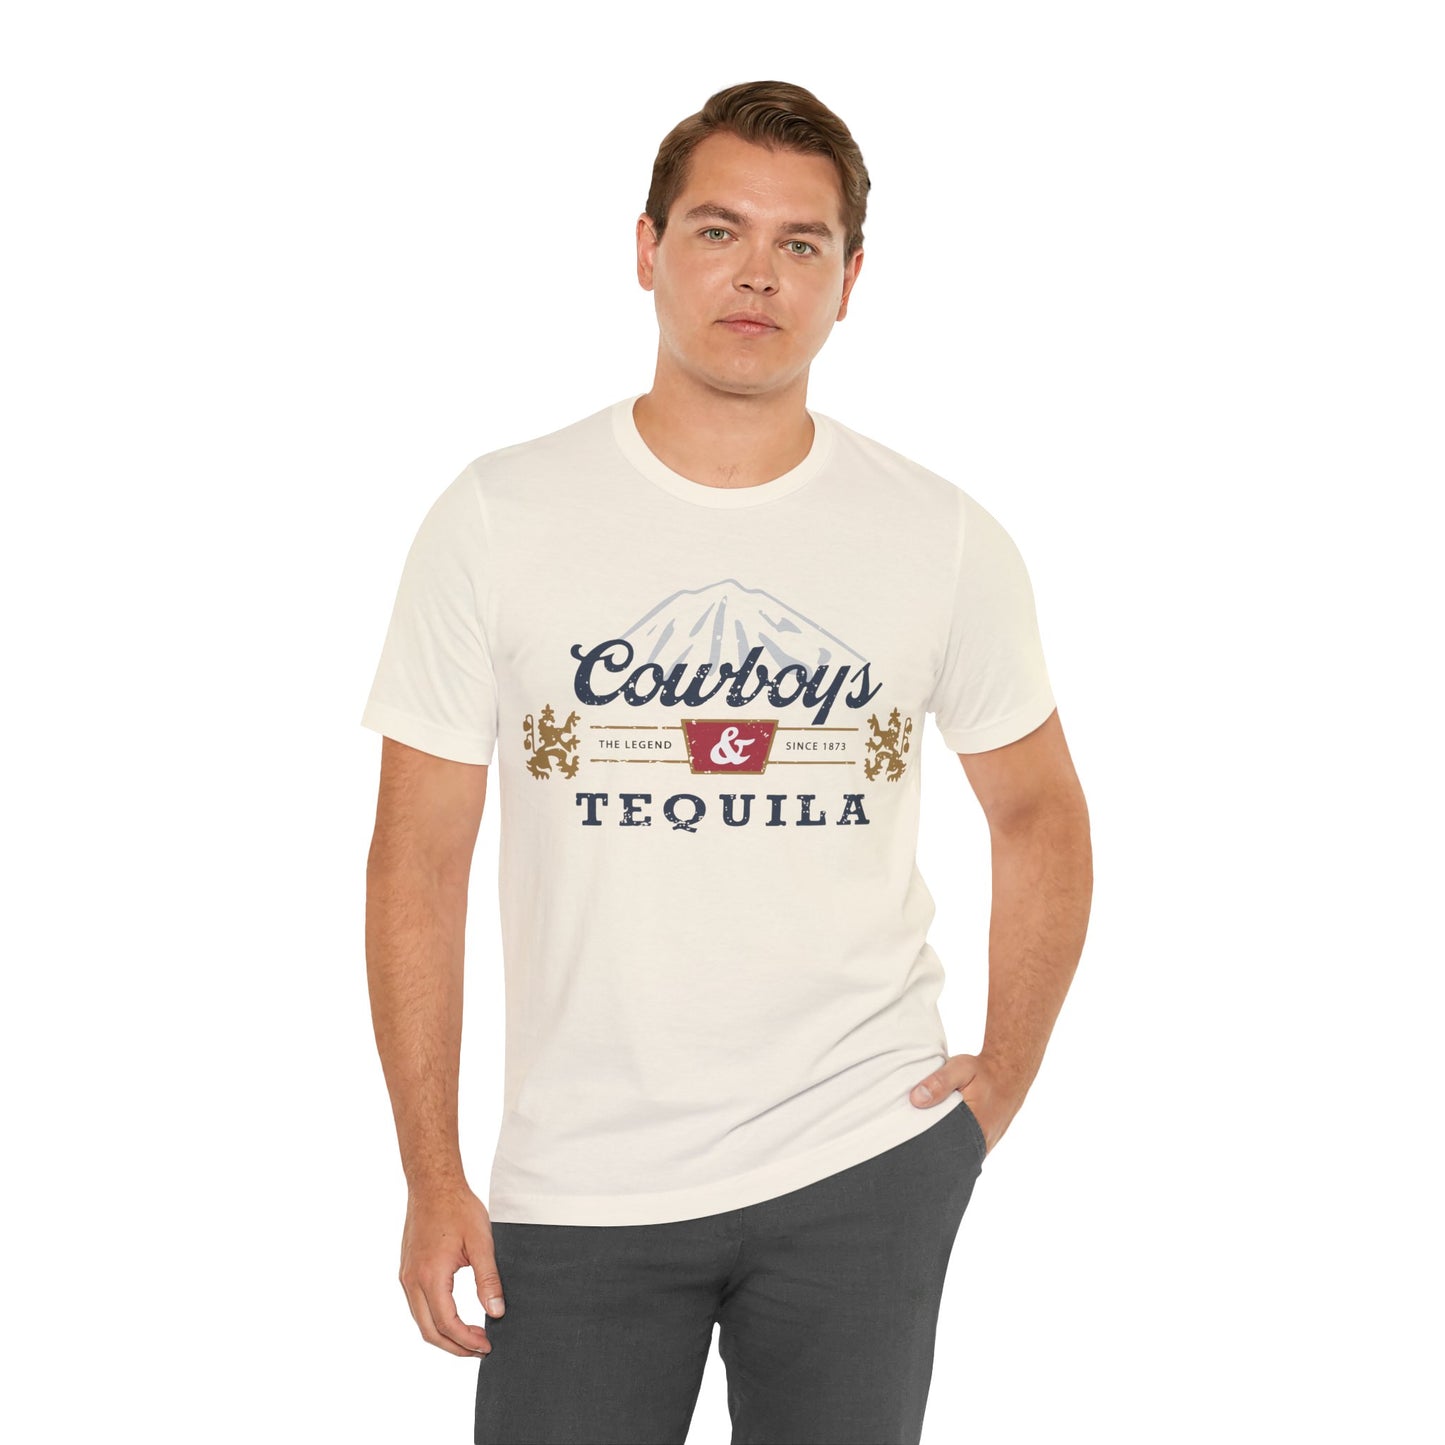 Cowboys and Tequila Unisex Tee